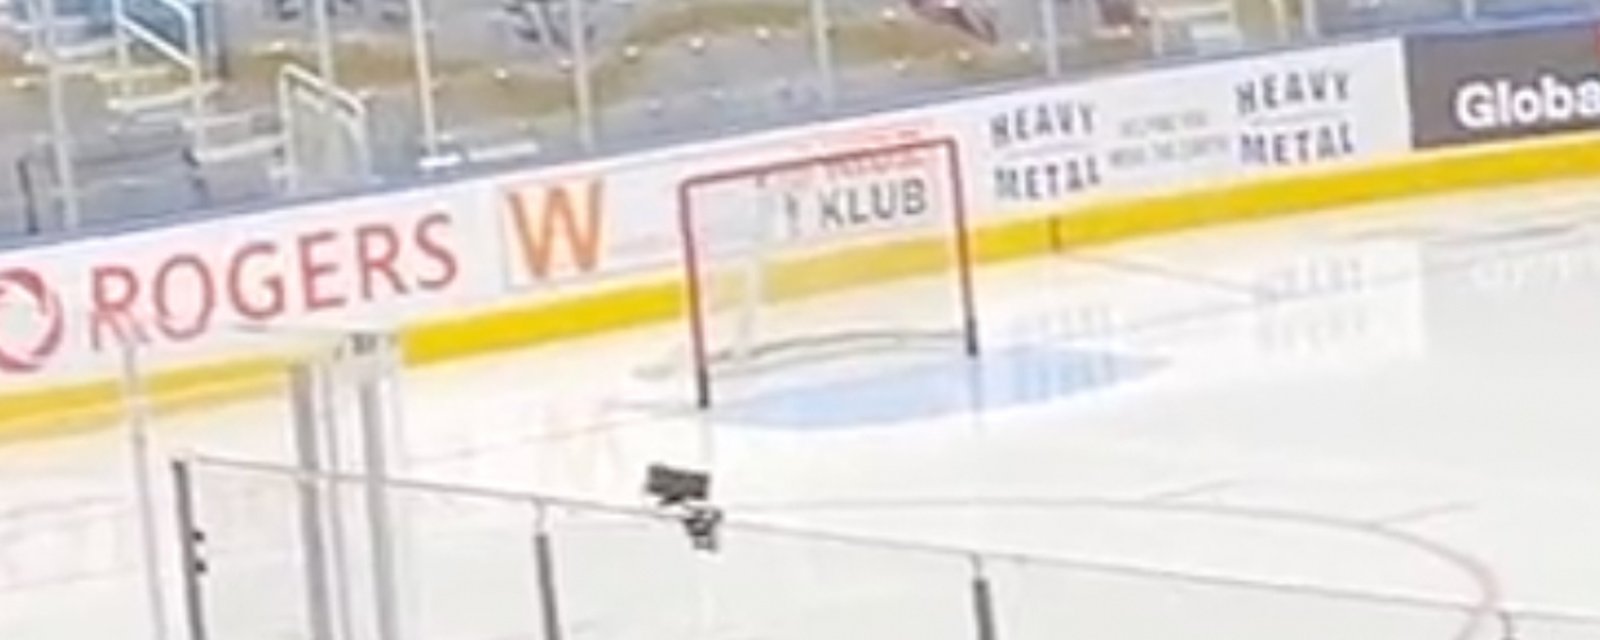 Stuart Skinner smashes his stick in frustration and leaves Oilers’ practice!